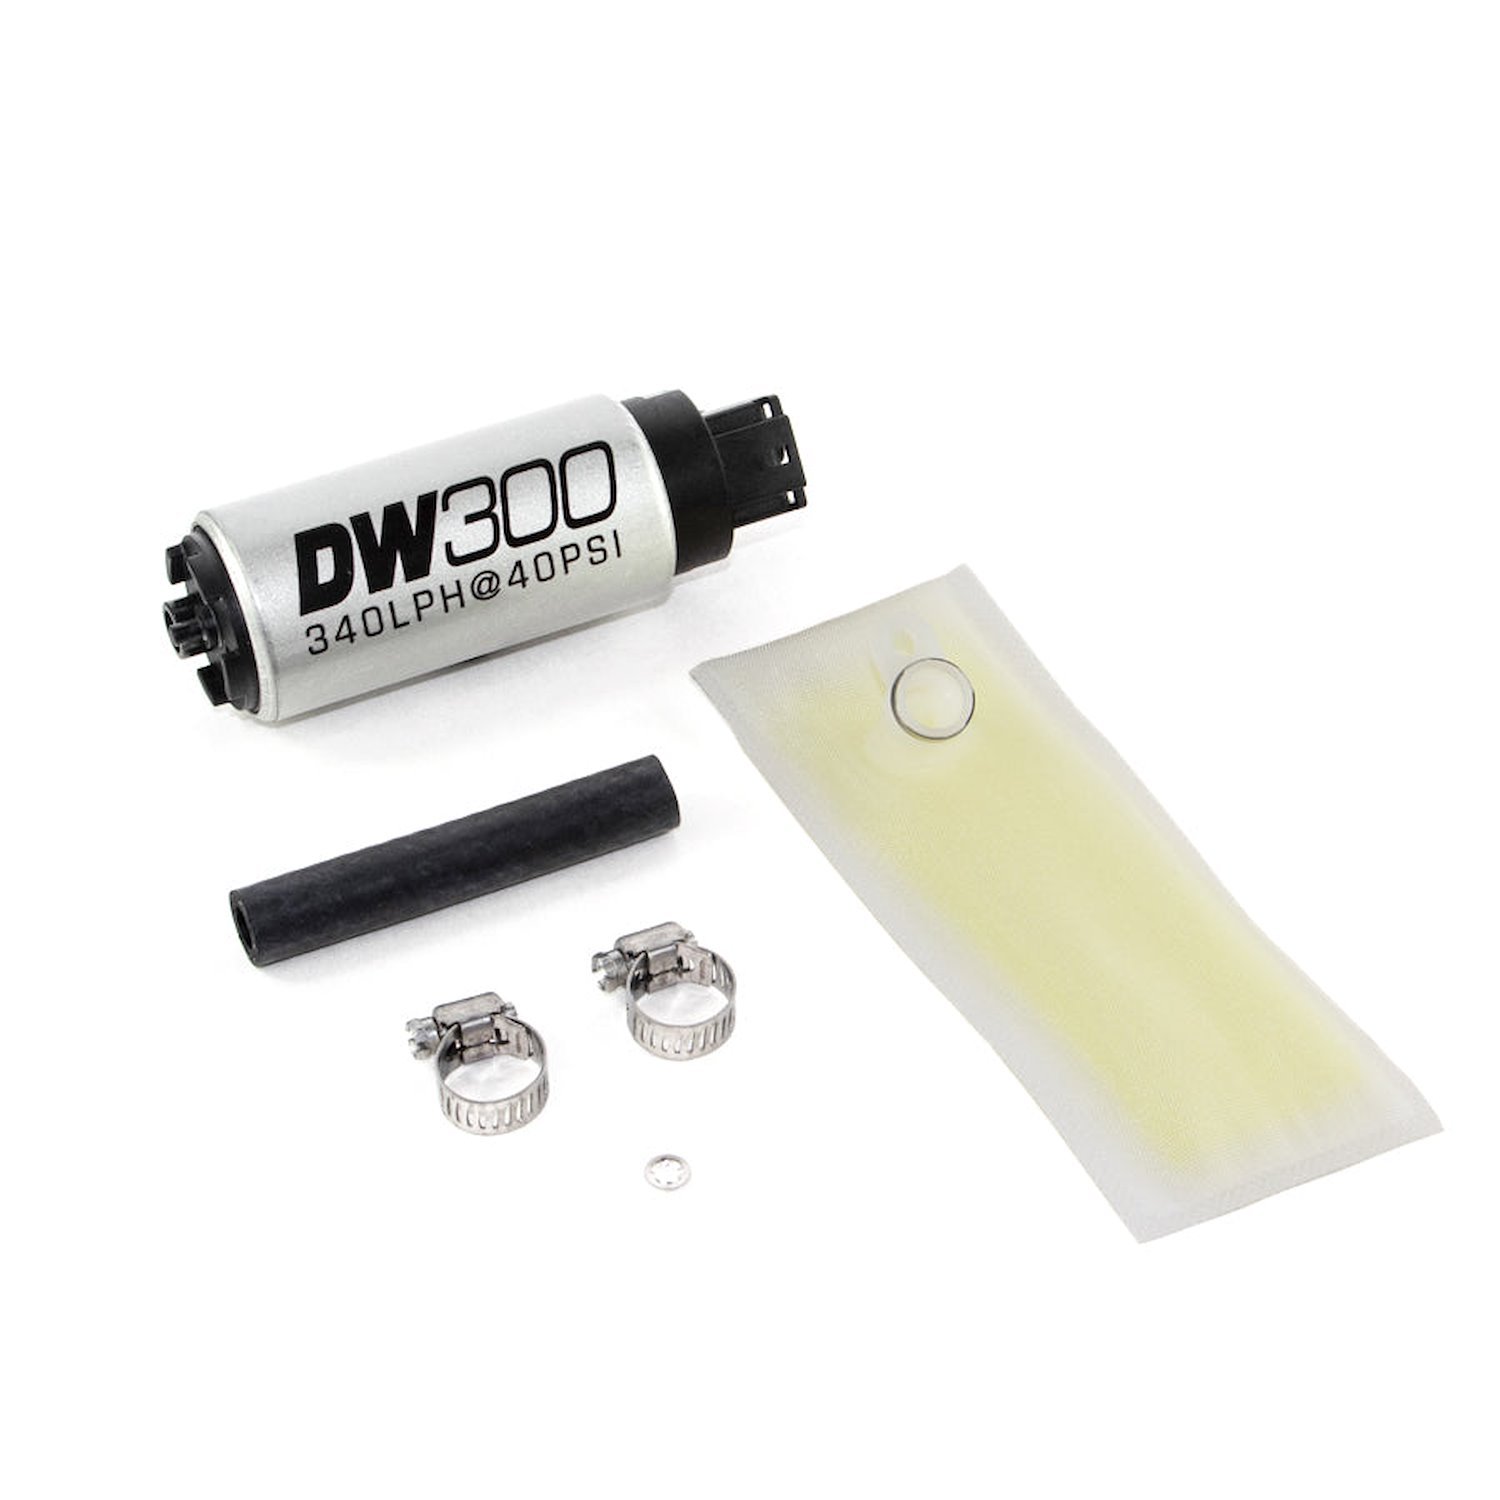 93010846 DW300 series 340lph in-tank fuel pump w/ install kit for Integra 94-01 and Civic 92-00